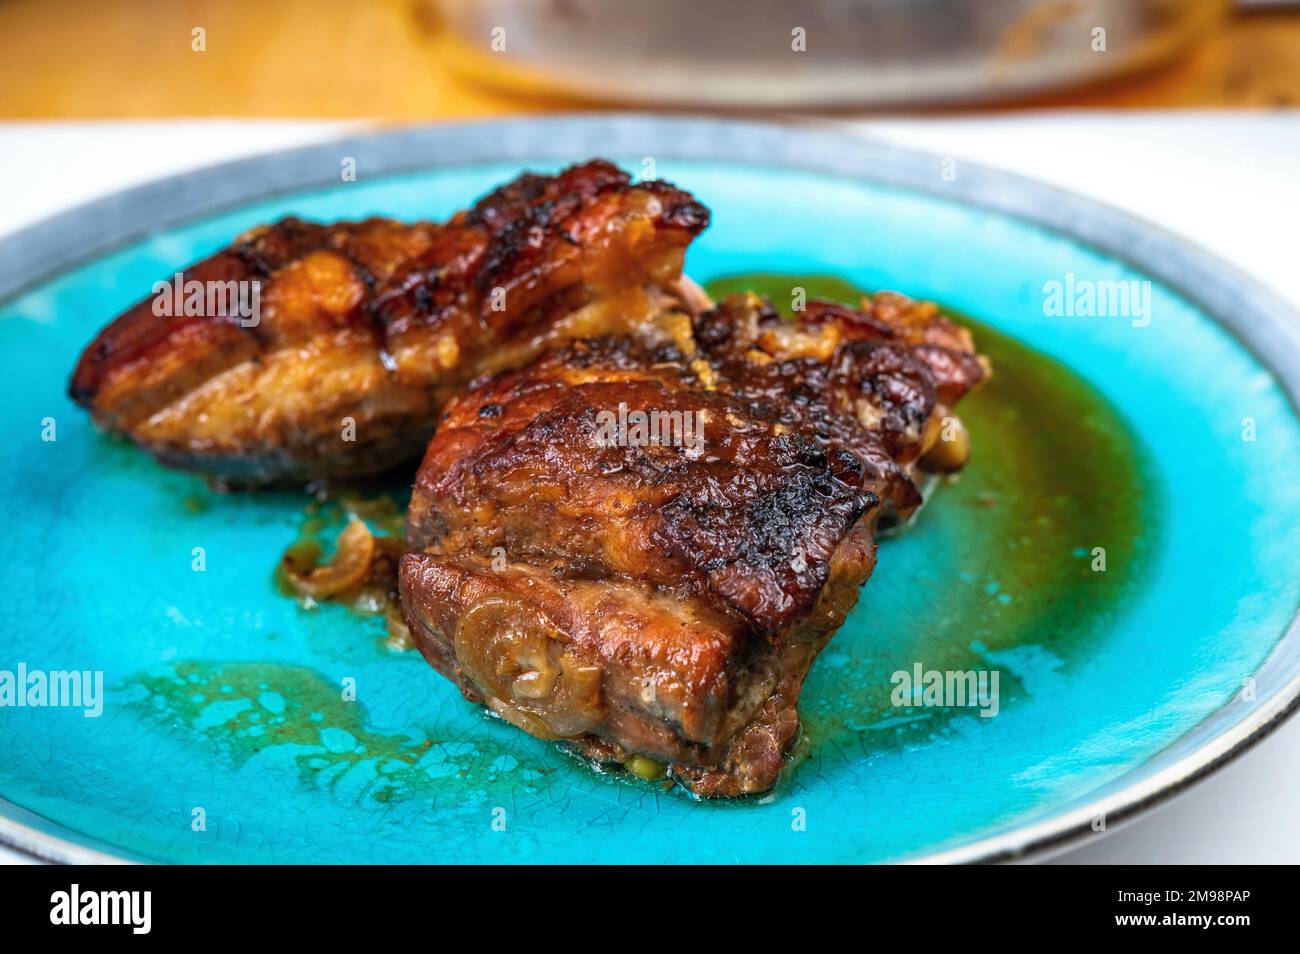 Two piece of baked pork belly with crispy skin on blue plate on table, closeup. Stock Photo